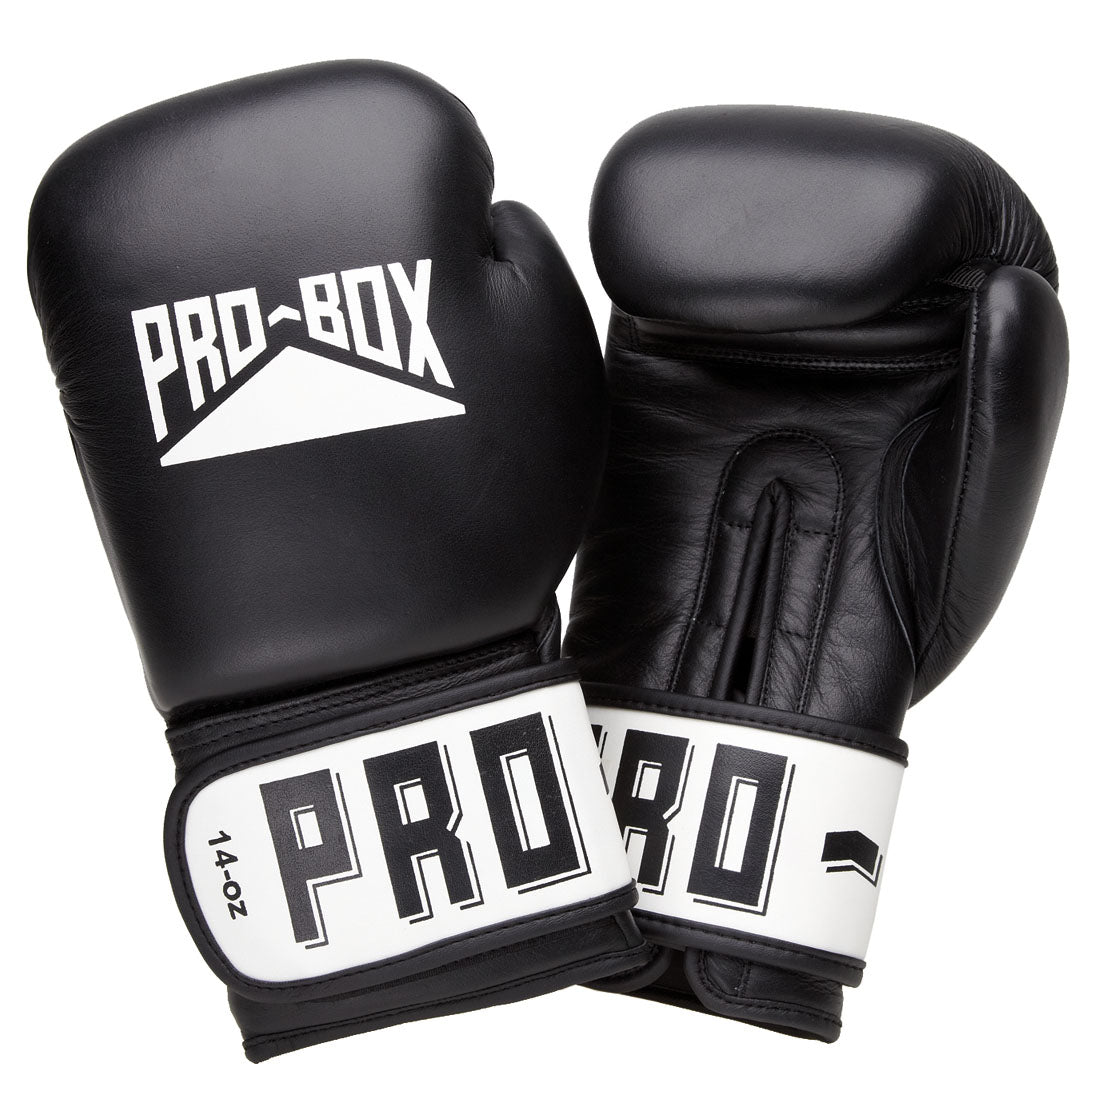 Pro-Box Leather Club Essentials Sparring Gloves